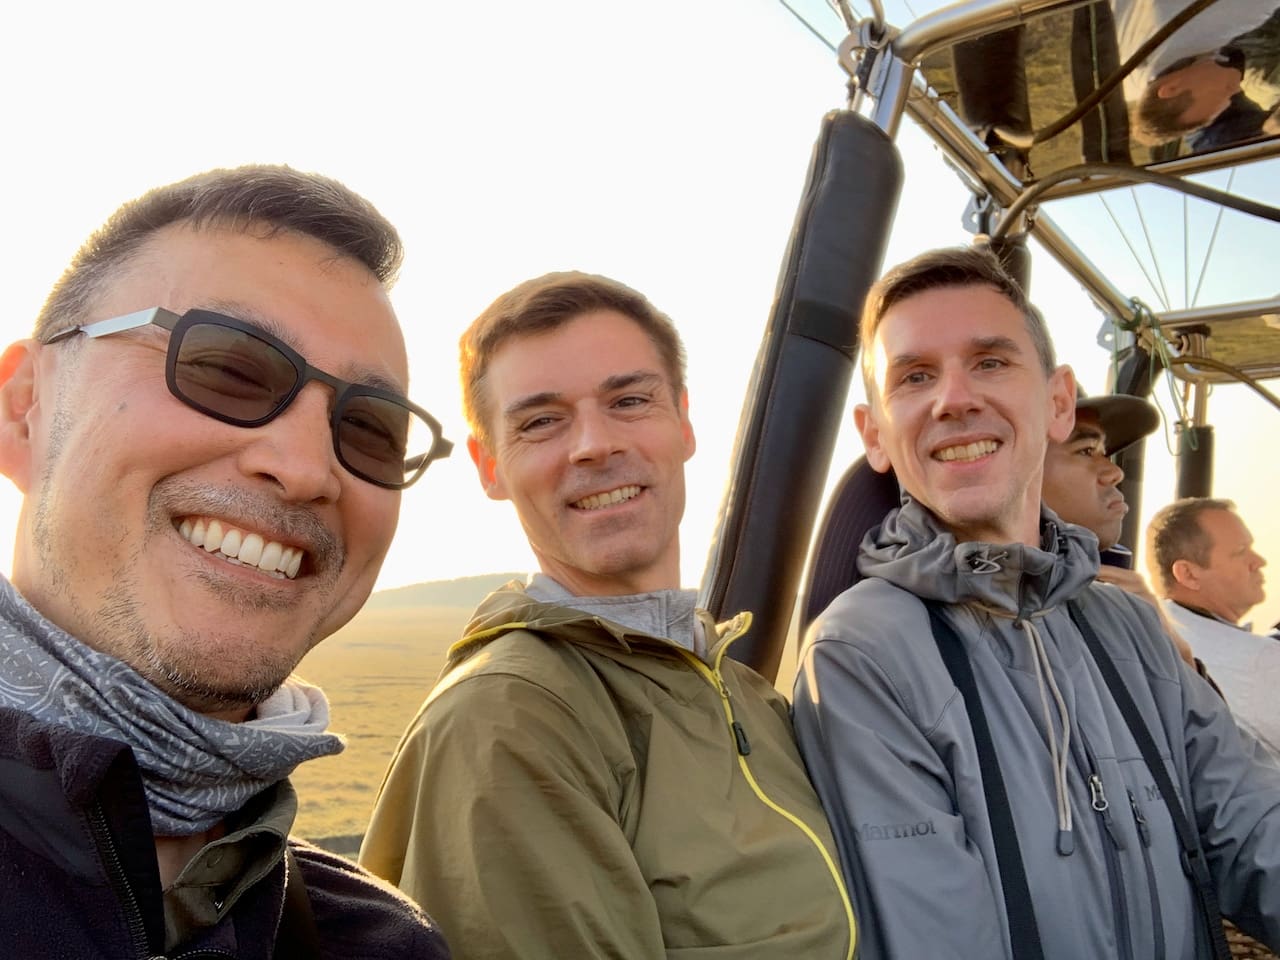 Three gay travellers prepare for a hot air balloon ride in Kenya.